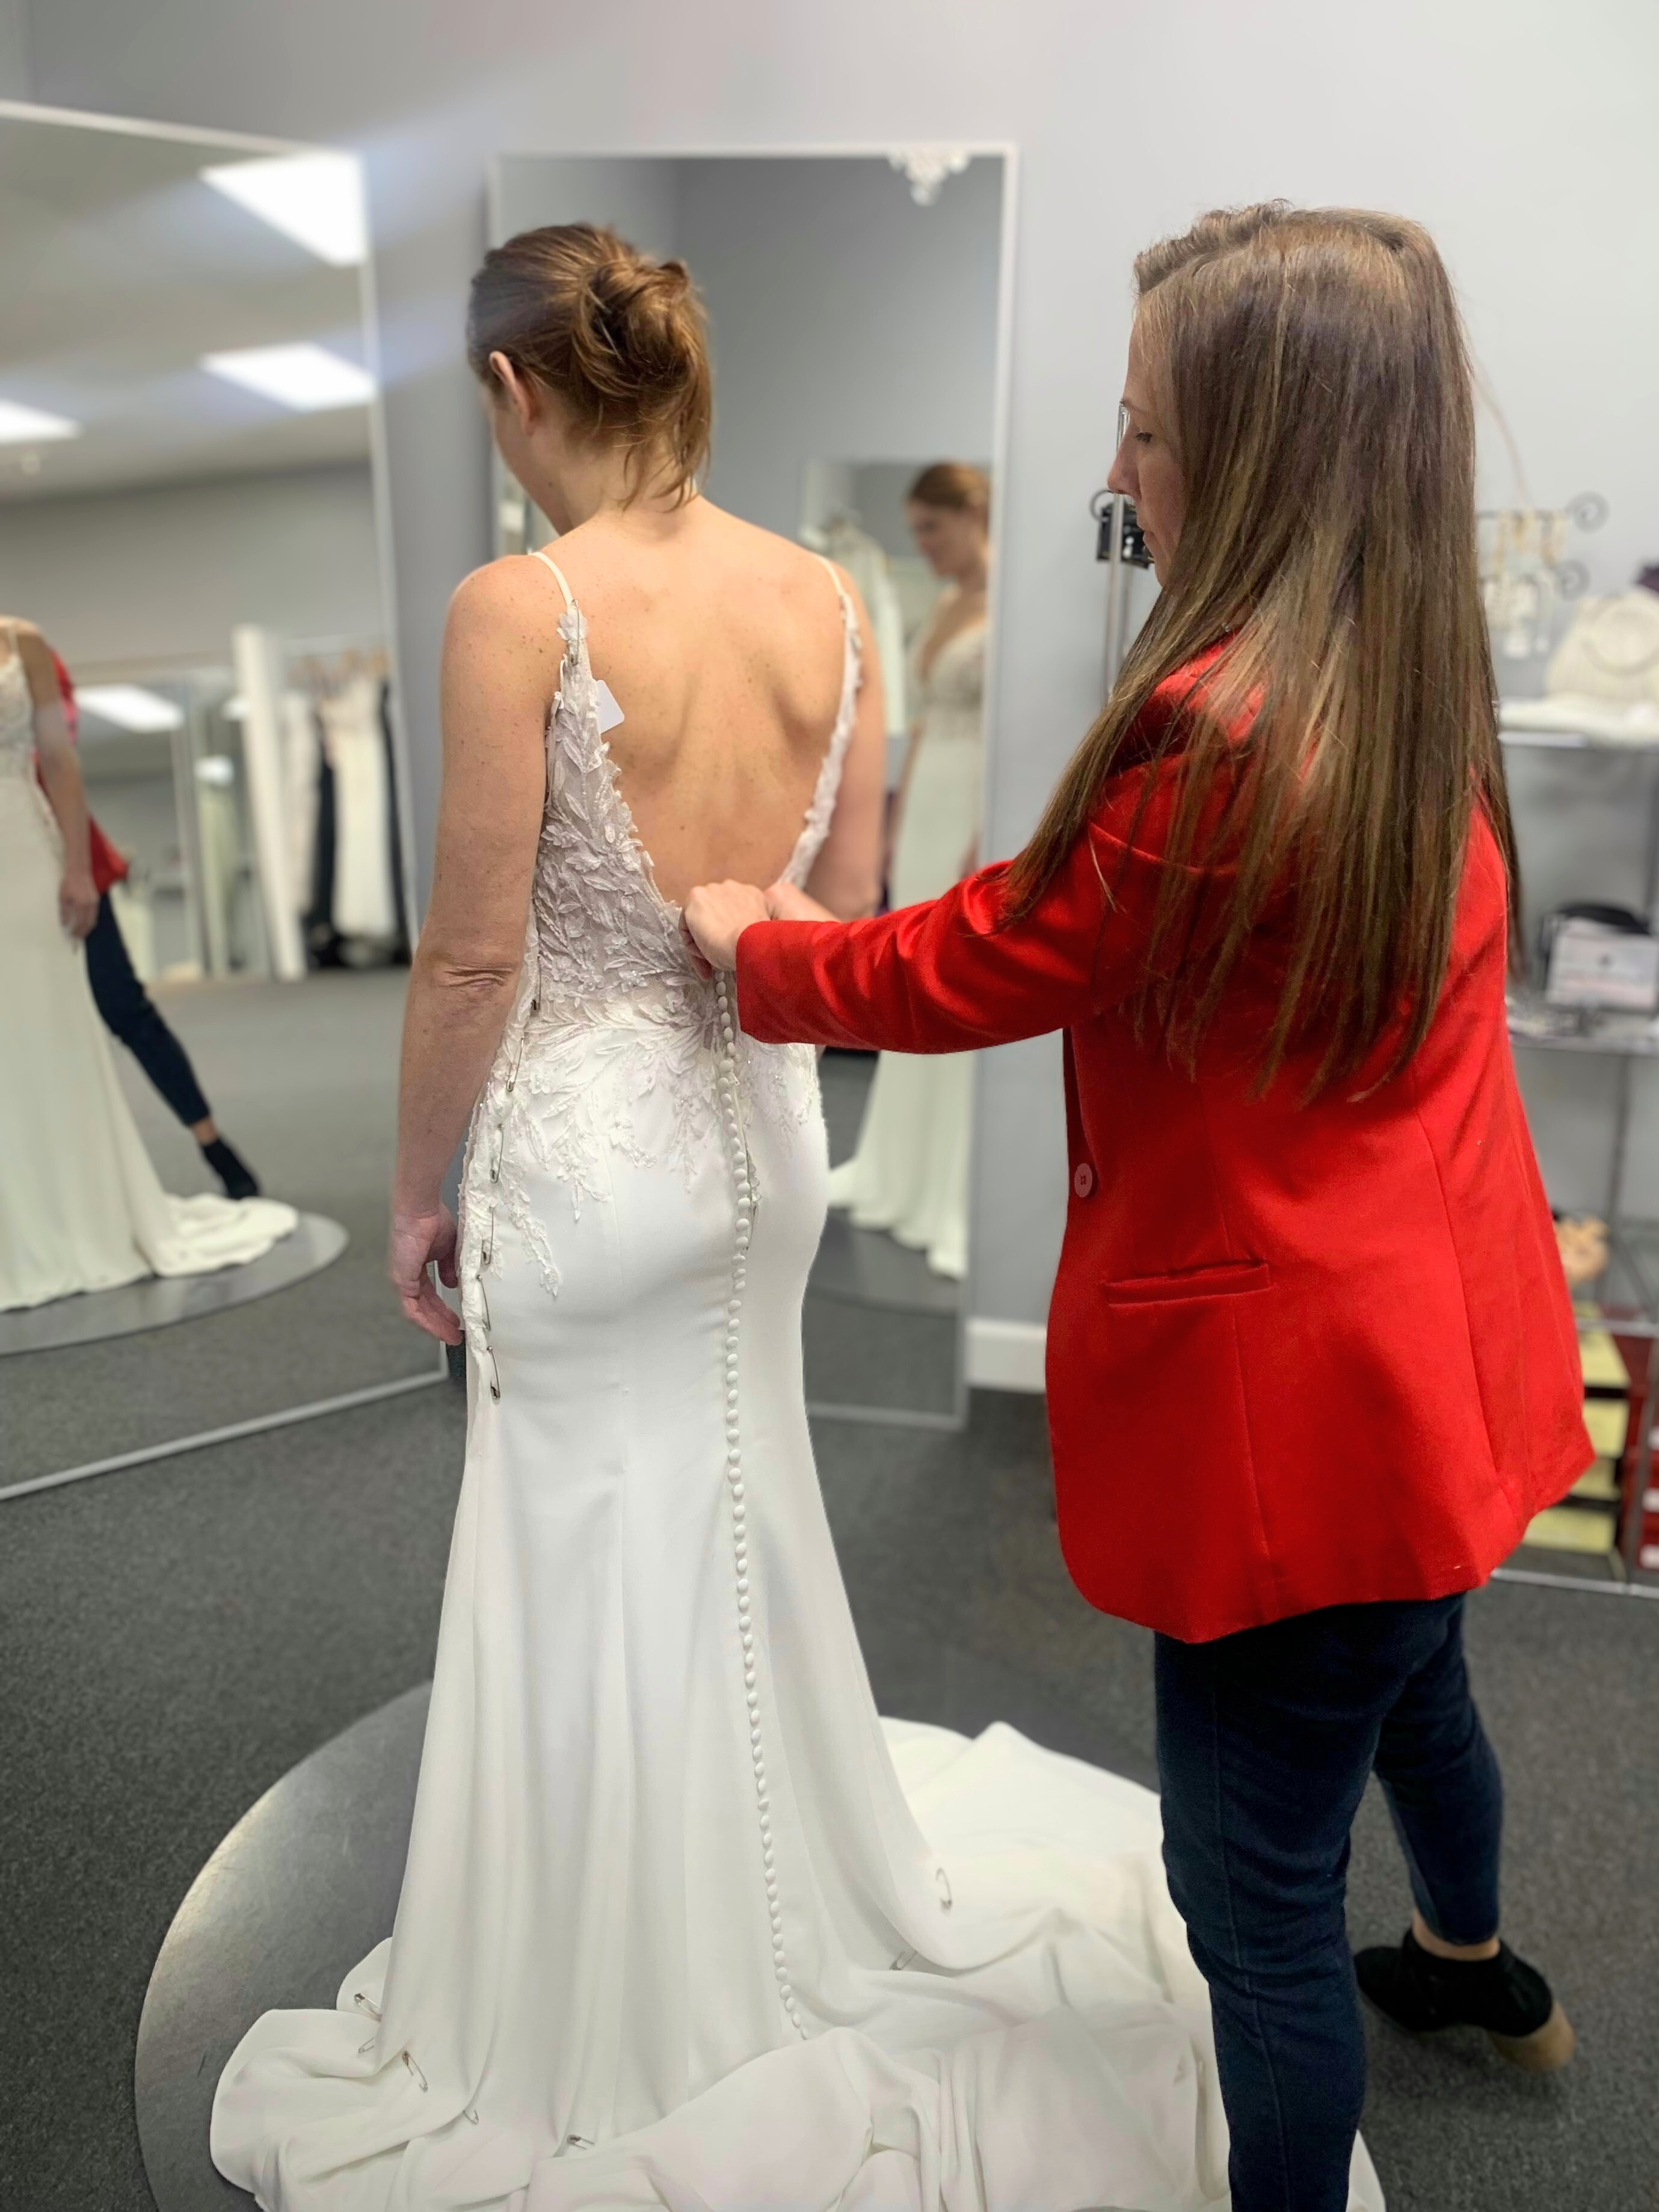 Wedding Dress Alterations and Fittings  hitchedcouk  hitchedcouk